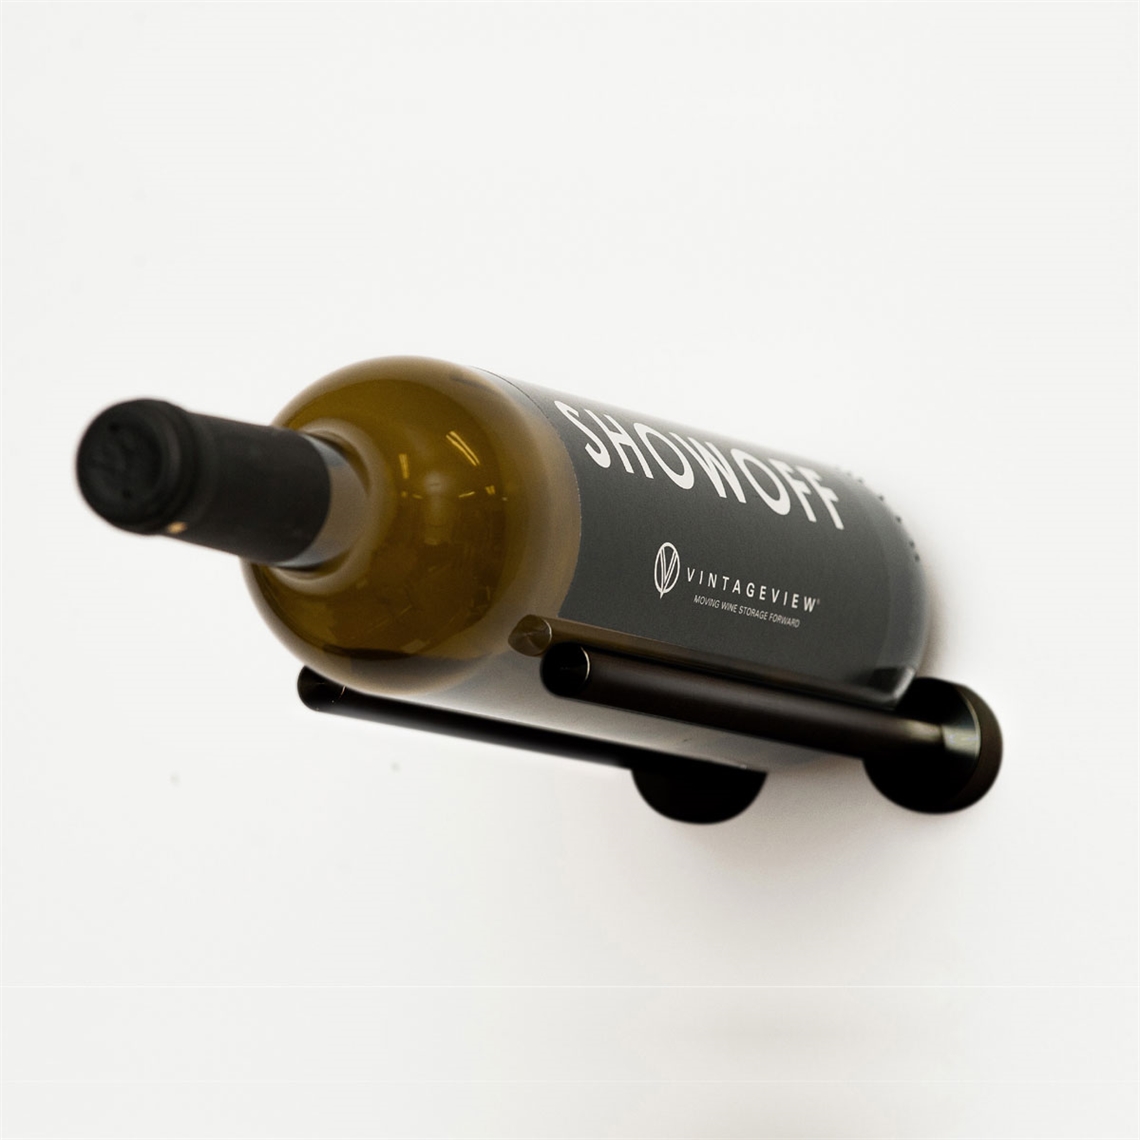 View more freestanding display racks from our Wall Mounted Wine Racks range